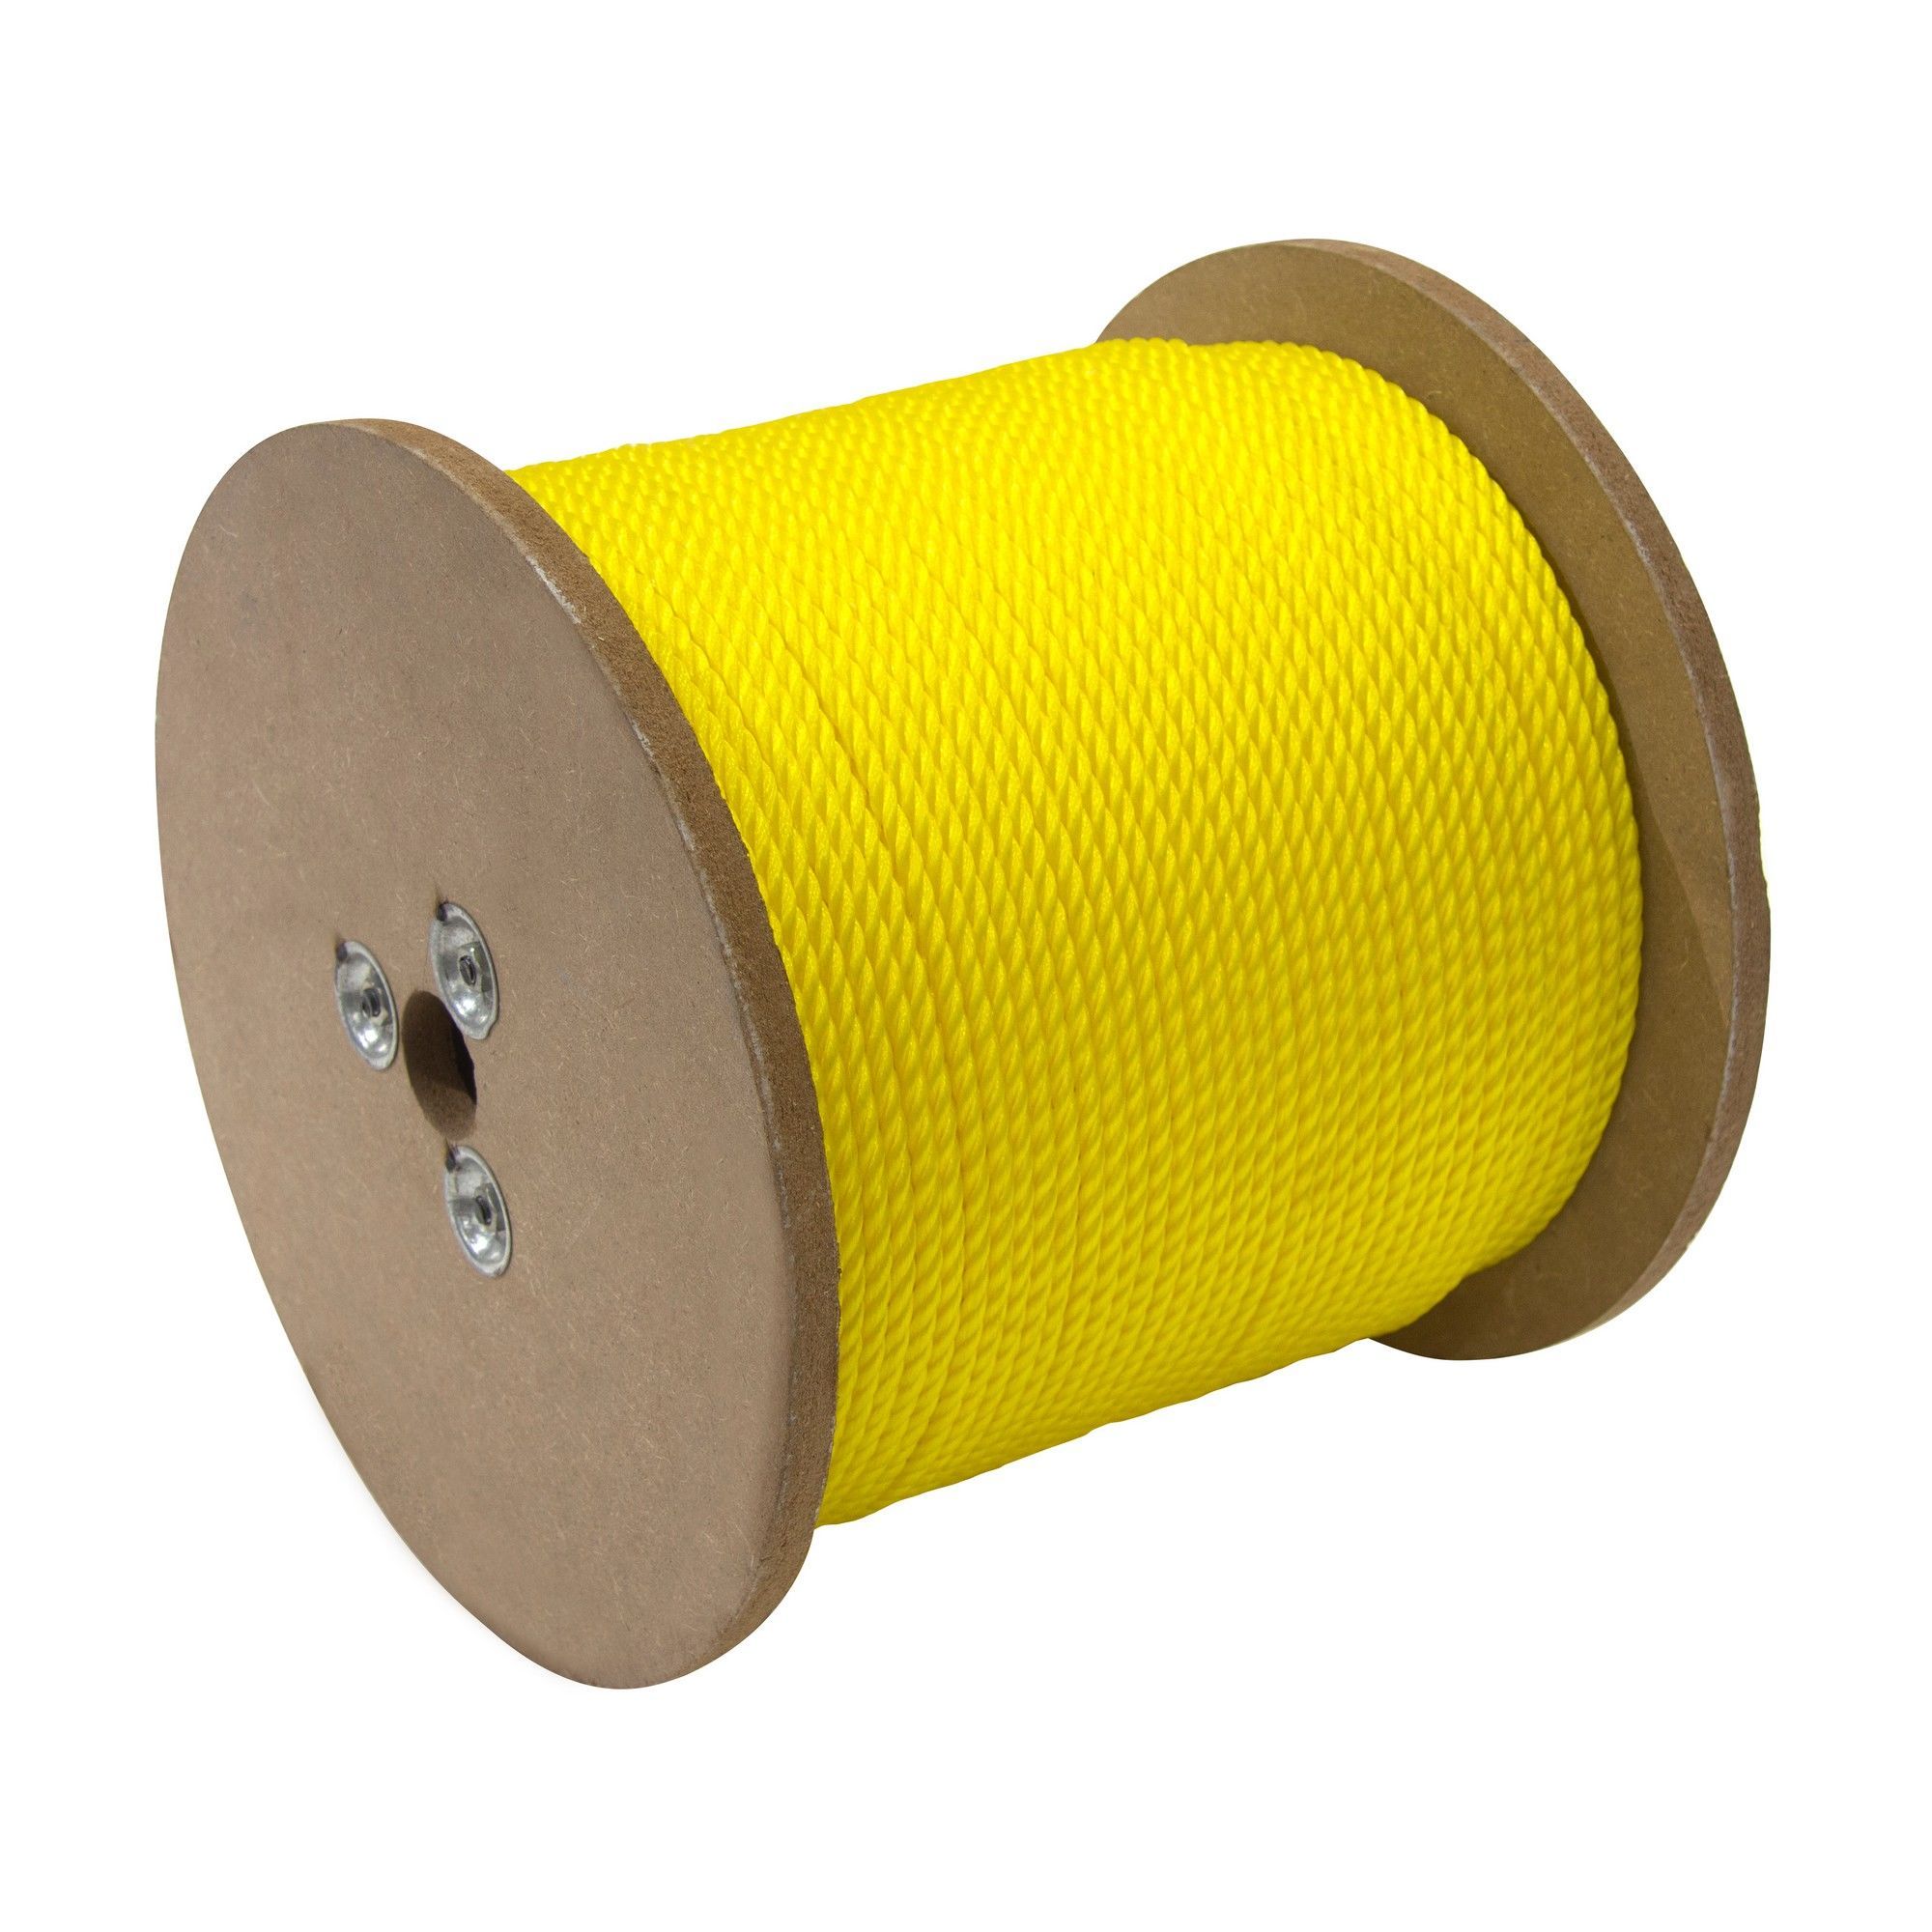 Twisted Polypropylene Rope - Yellow - 1/4 x 1,200' from KINGCORD